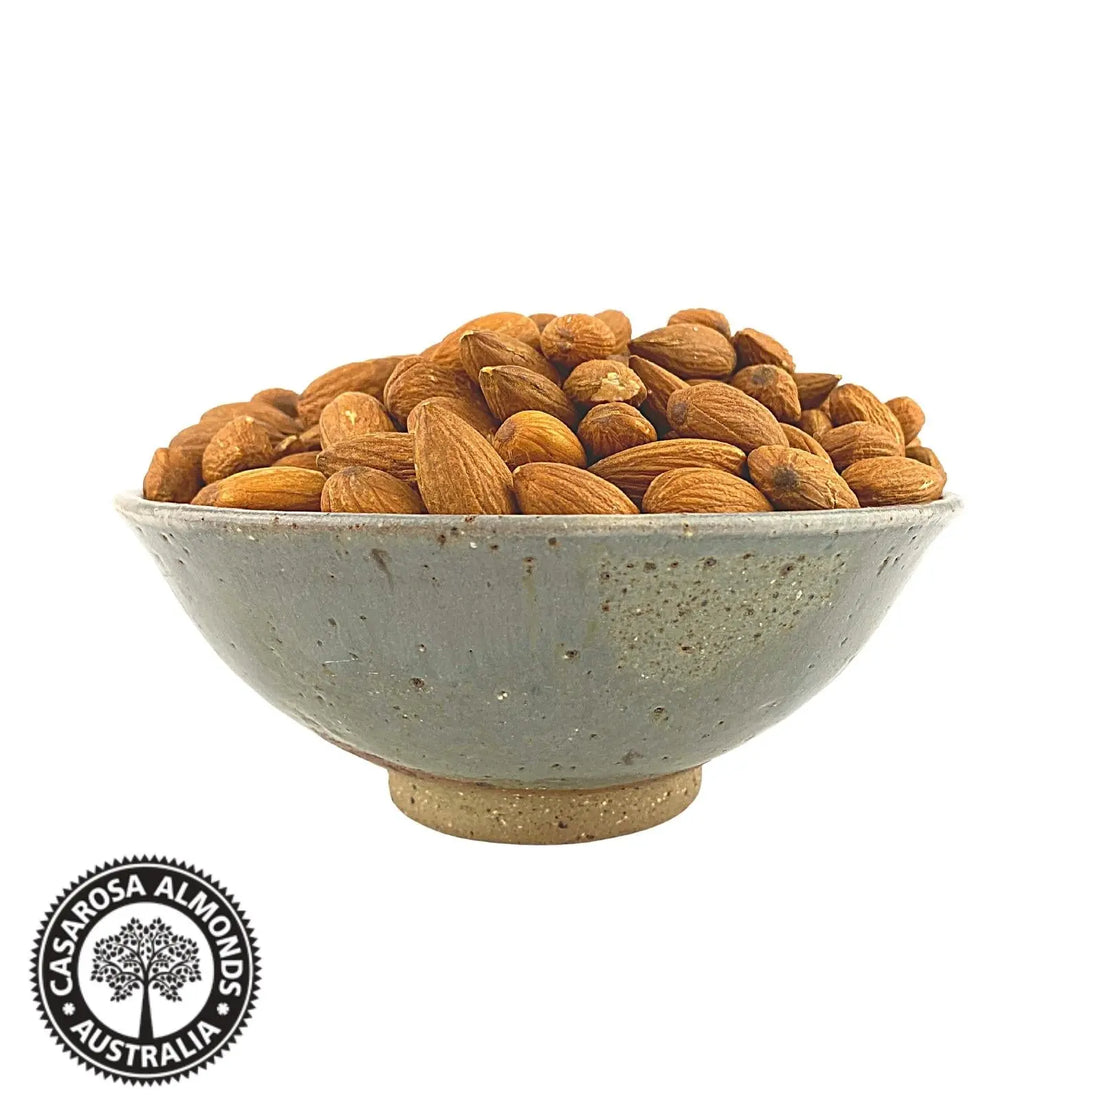 Almonds Roasted Insecticide Free 500g-Nuts & Seeds-The Almond Farmer-Sovereign Foods-Australian Grown Nuts-Pesticide Free-Chemical Free